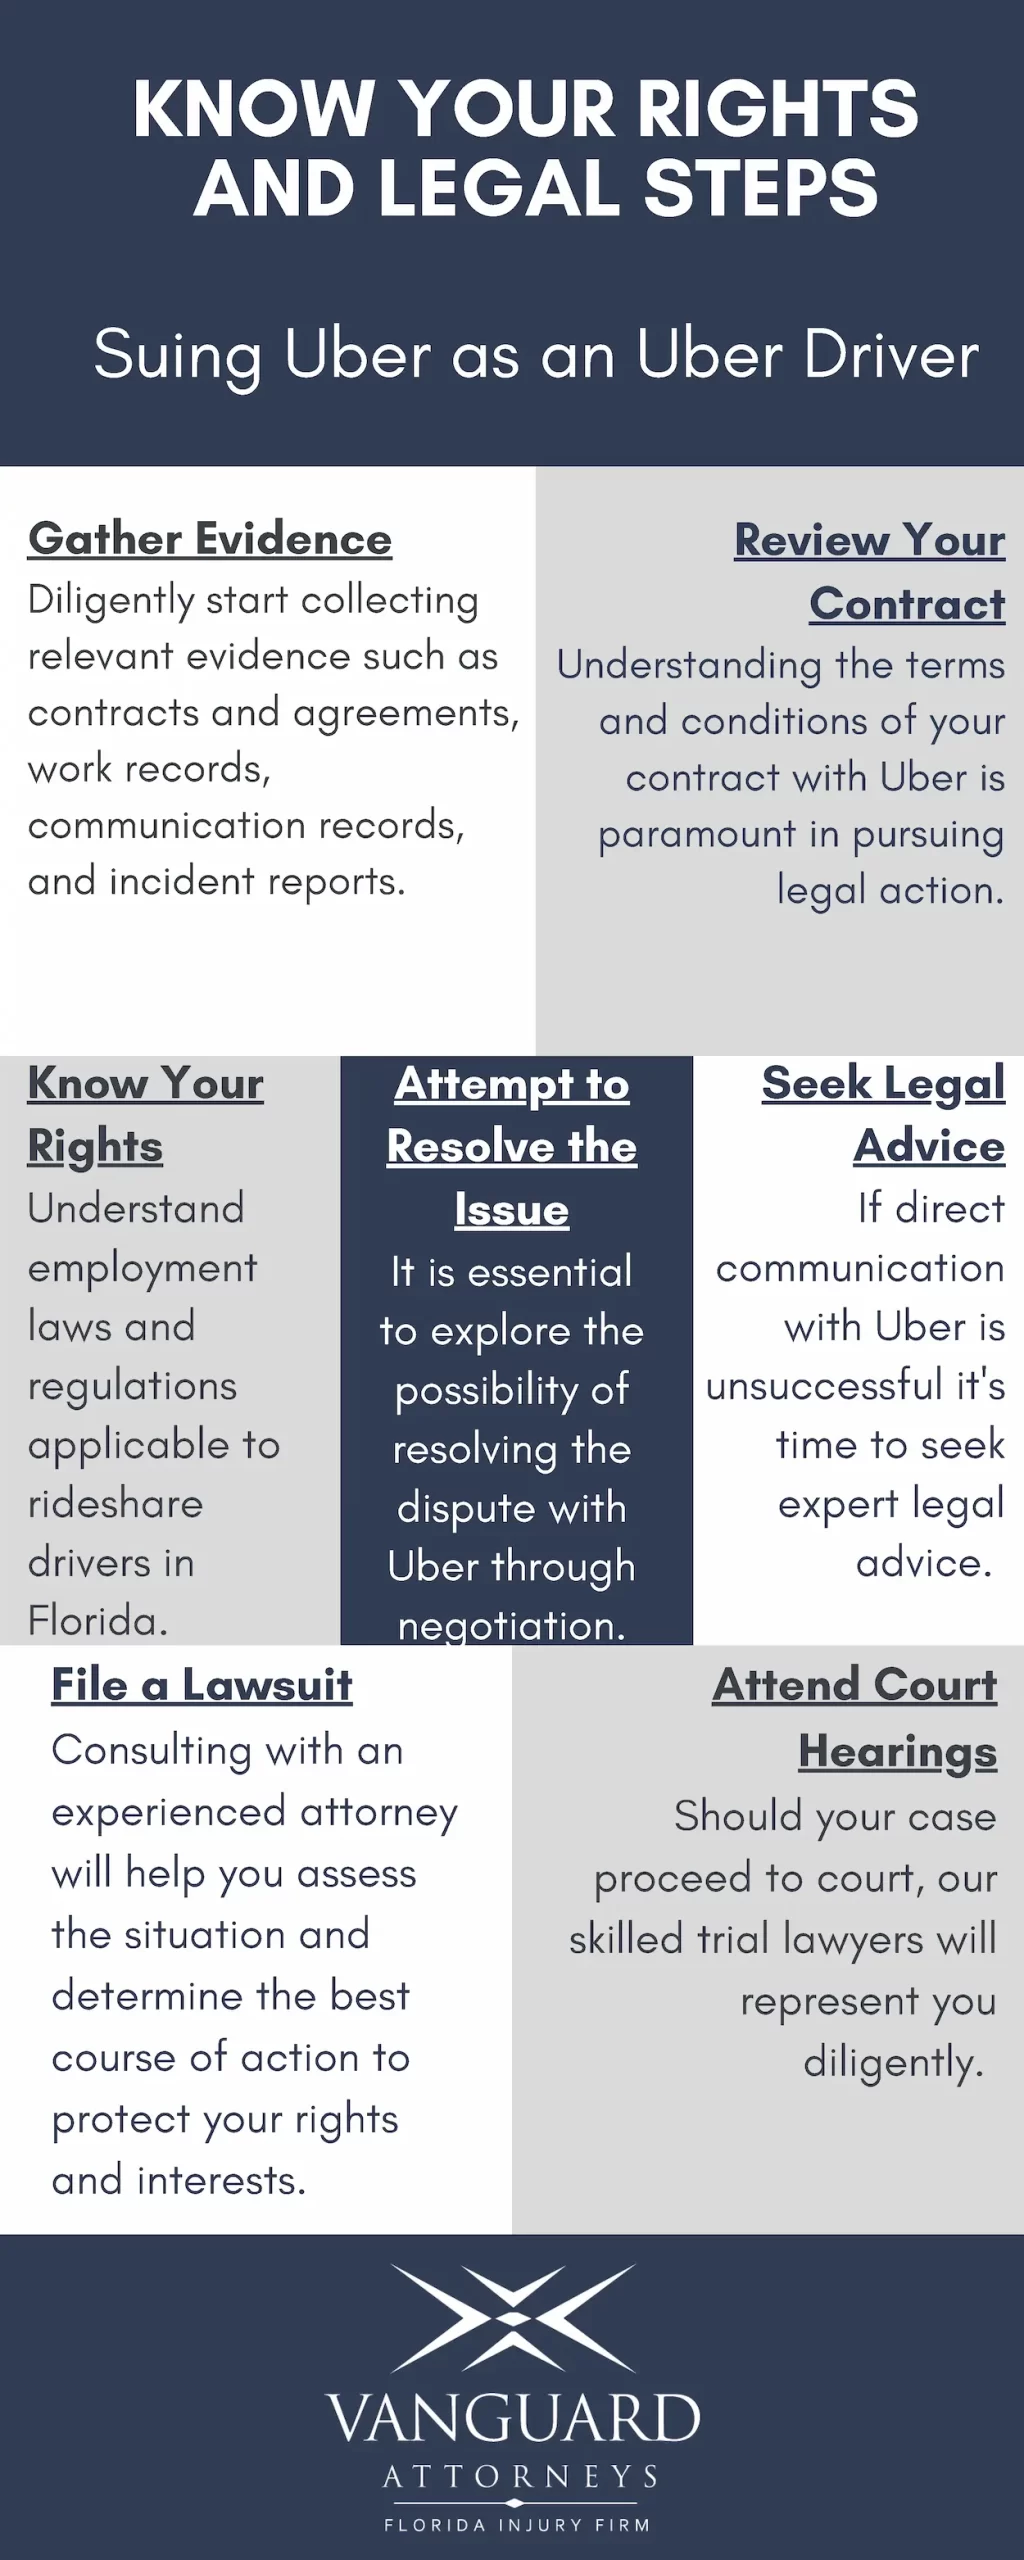 Infographic guide to suing Uber as a driver when your rights as an Uber driver have been violated.